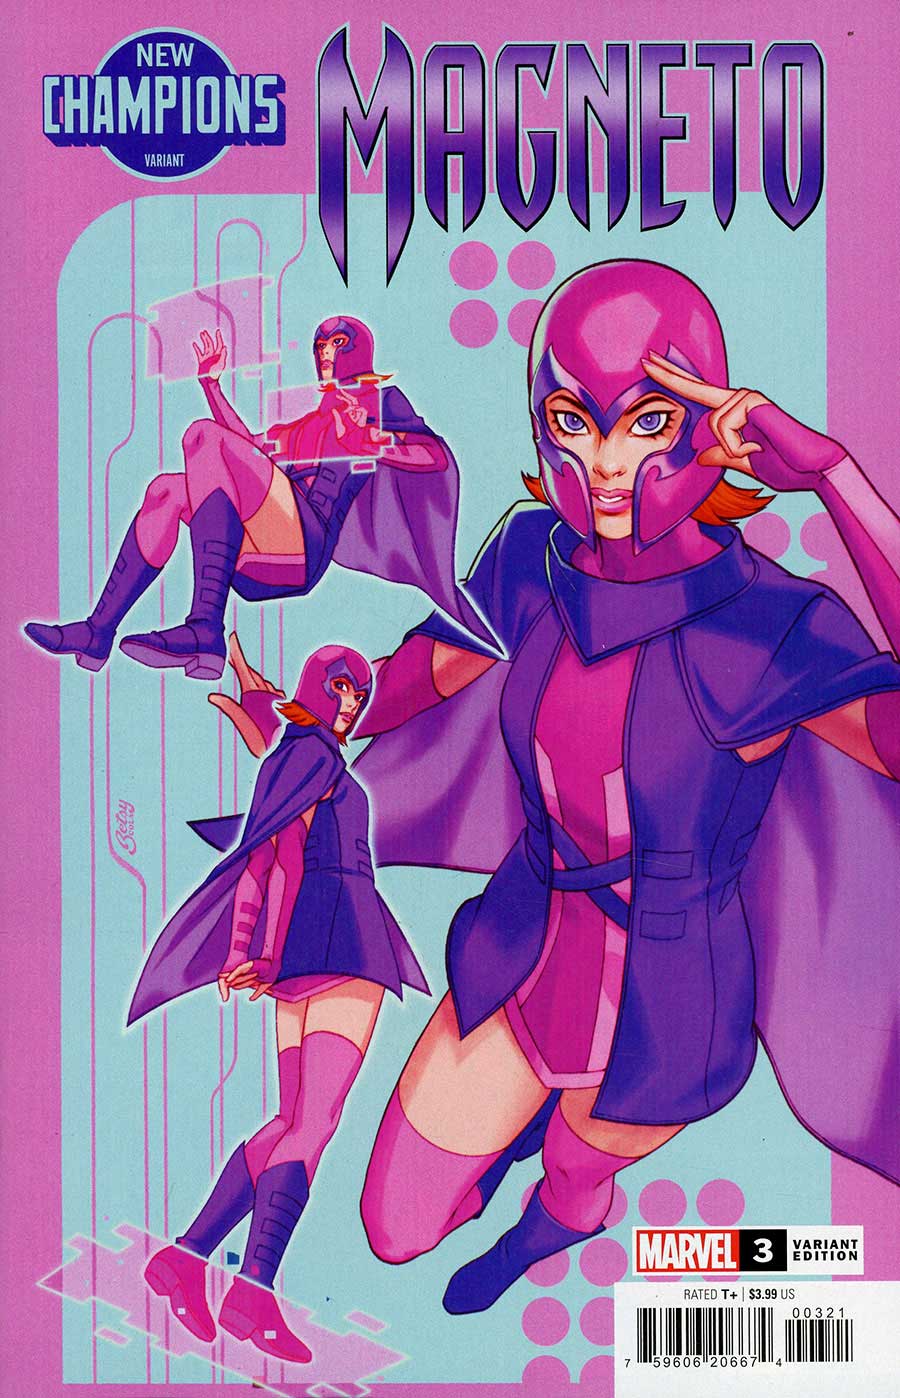 Magneto Vol 4 #3 Cover B Variant Betsy Cola New Champions Cover